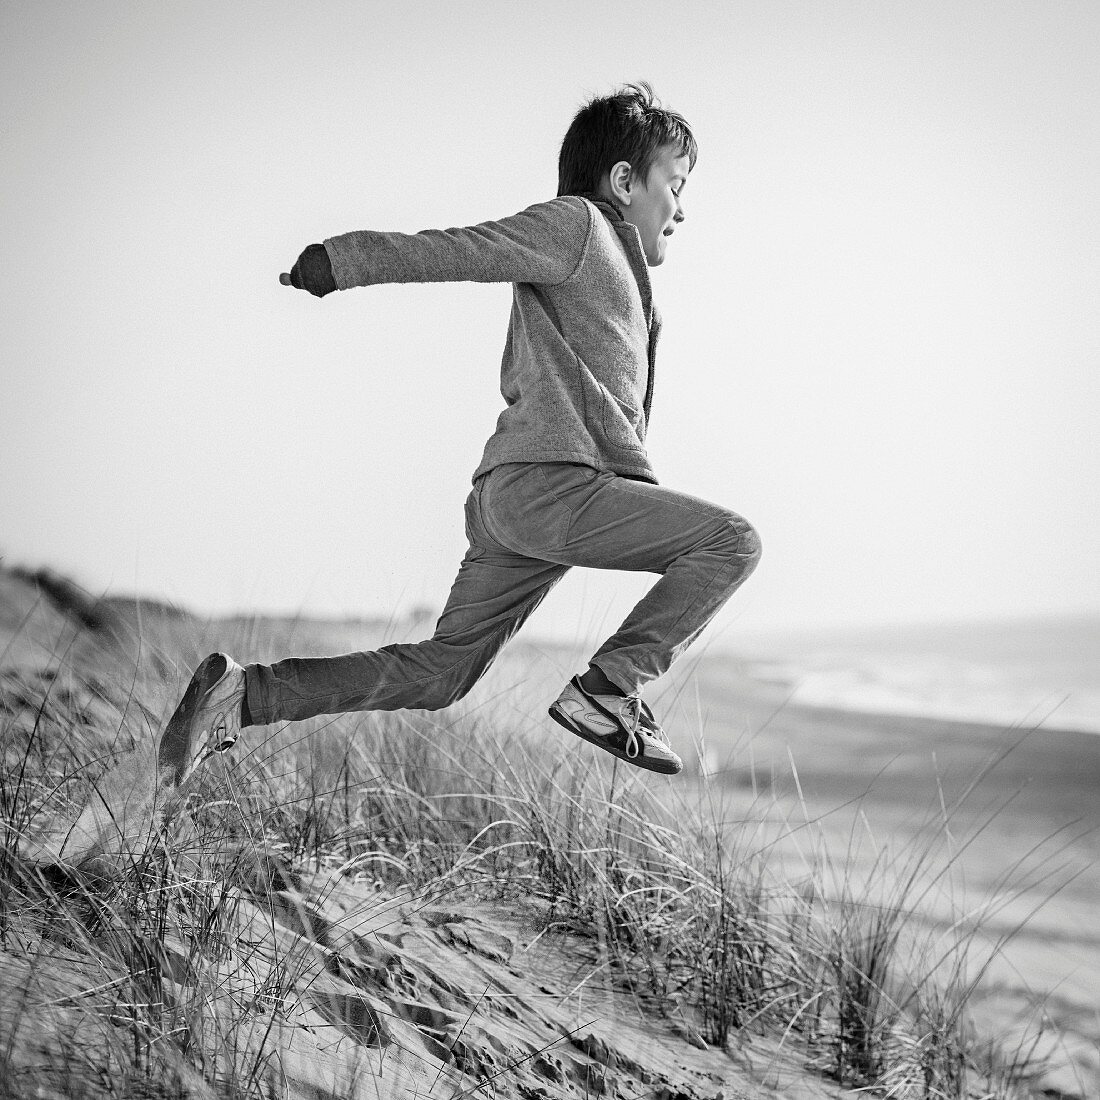 A little boy jumping from sanddunes (black-and-white shot)